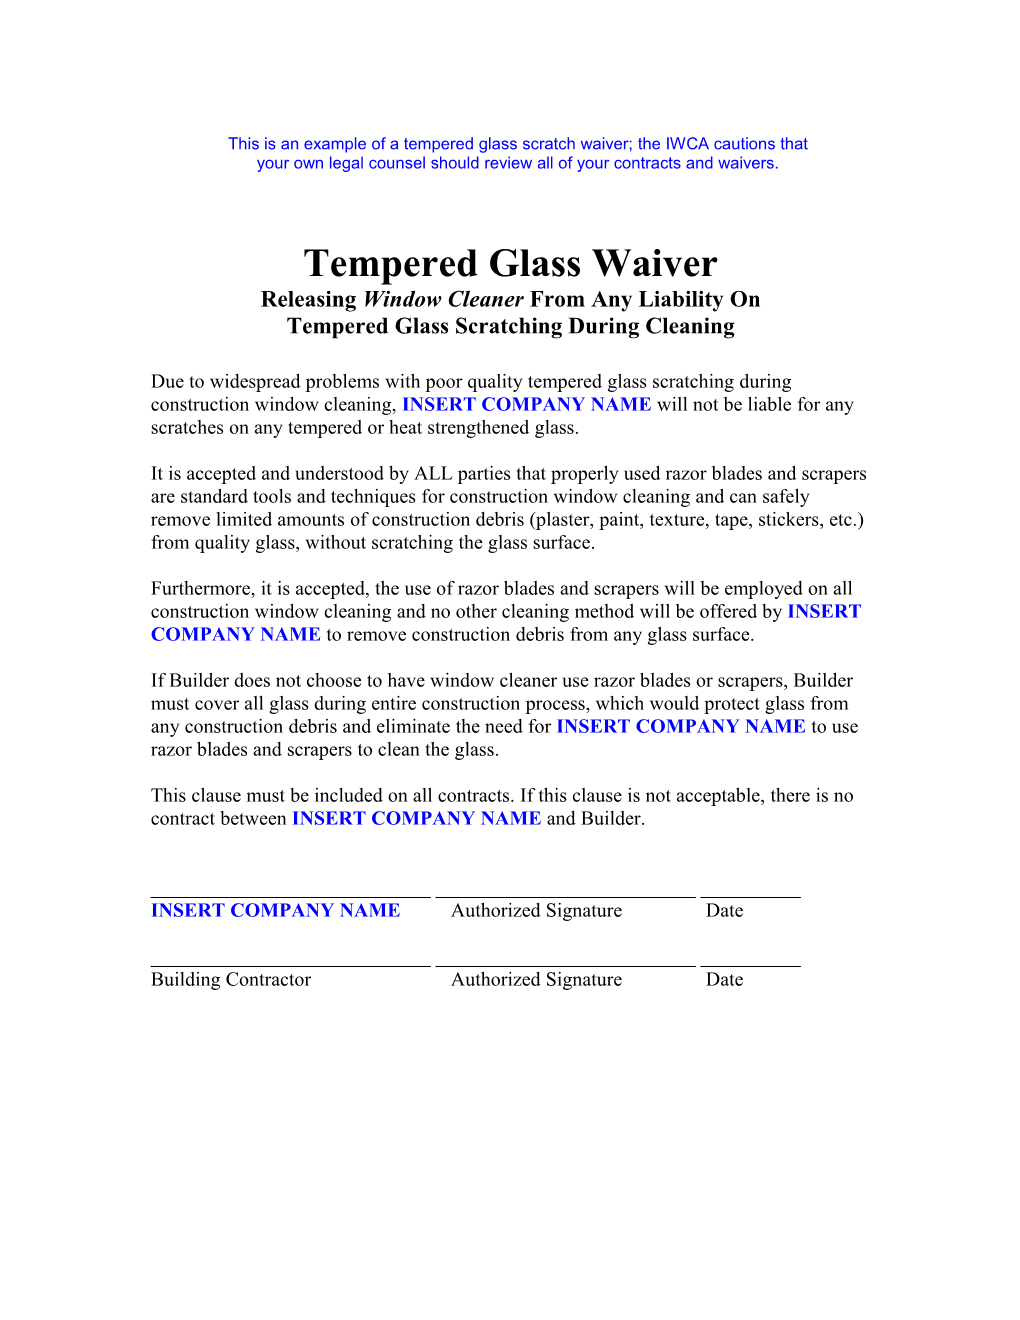 Tempered Glass Waiver